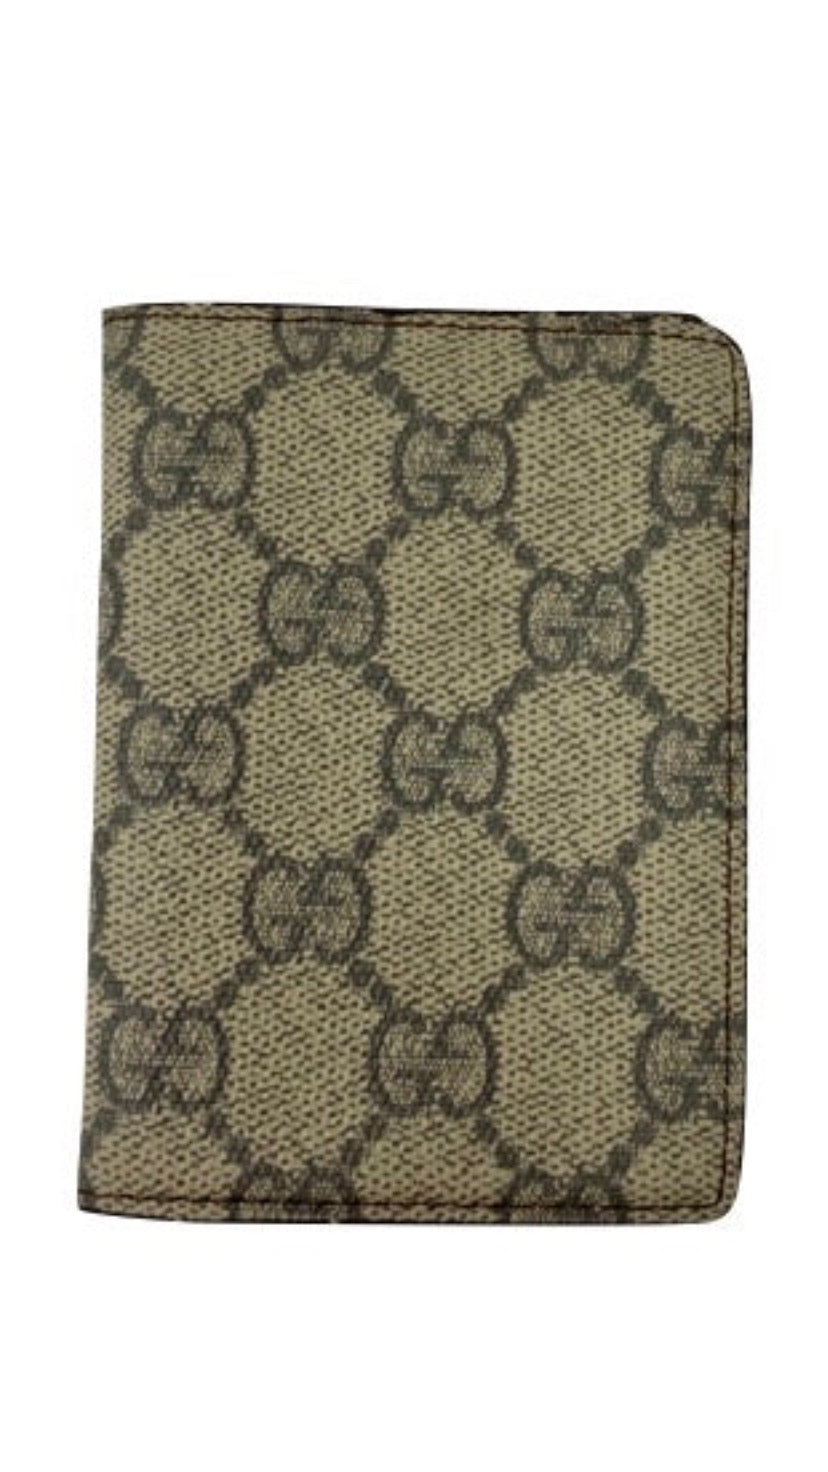 Gucci by Tom Ford Monogram Card Wallet